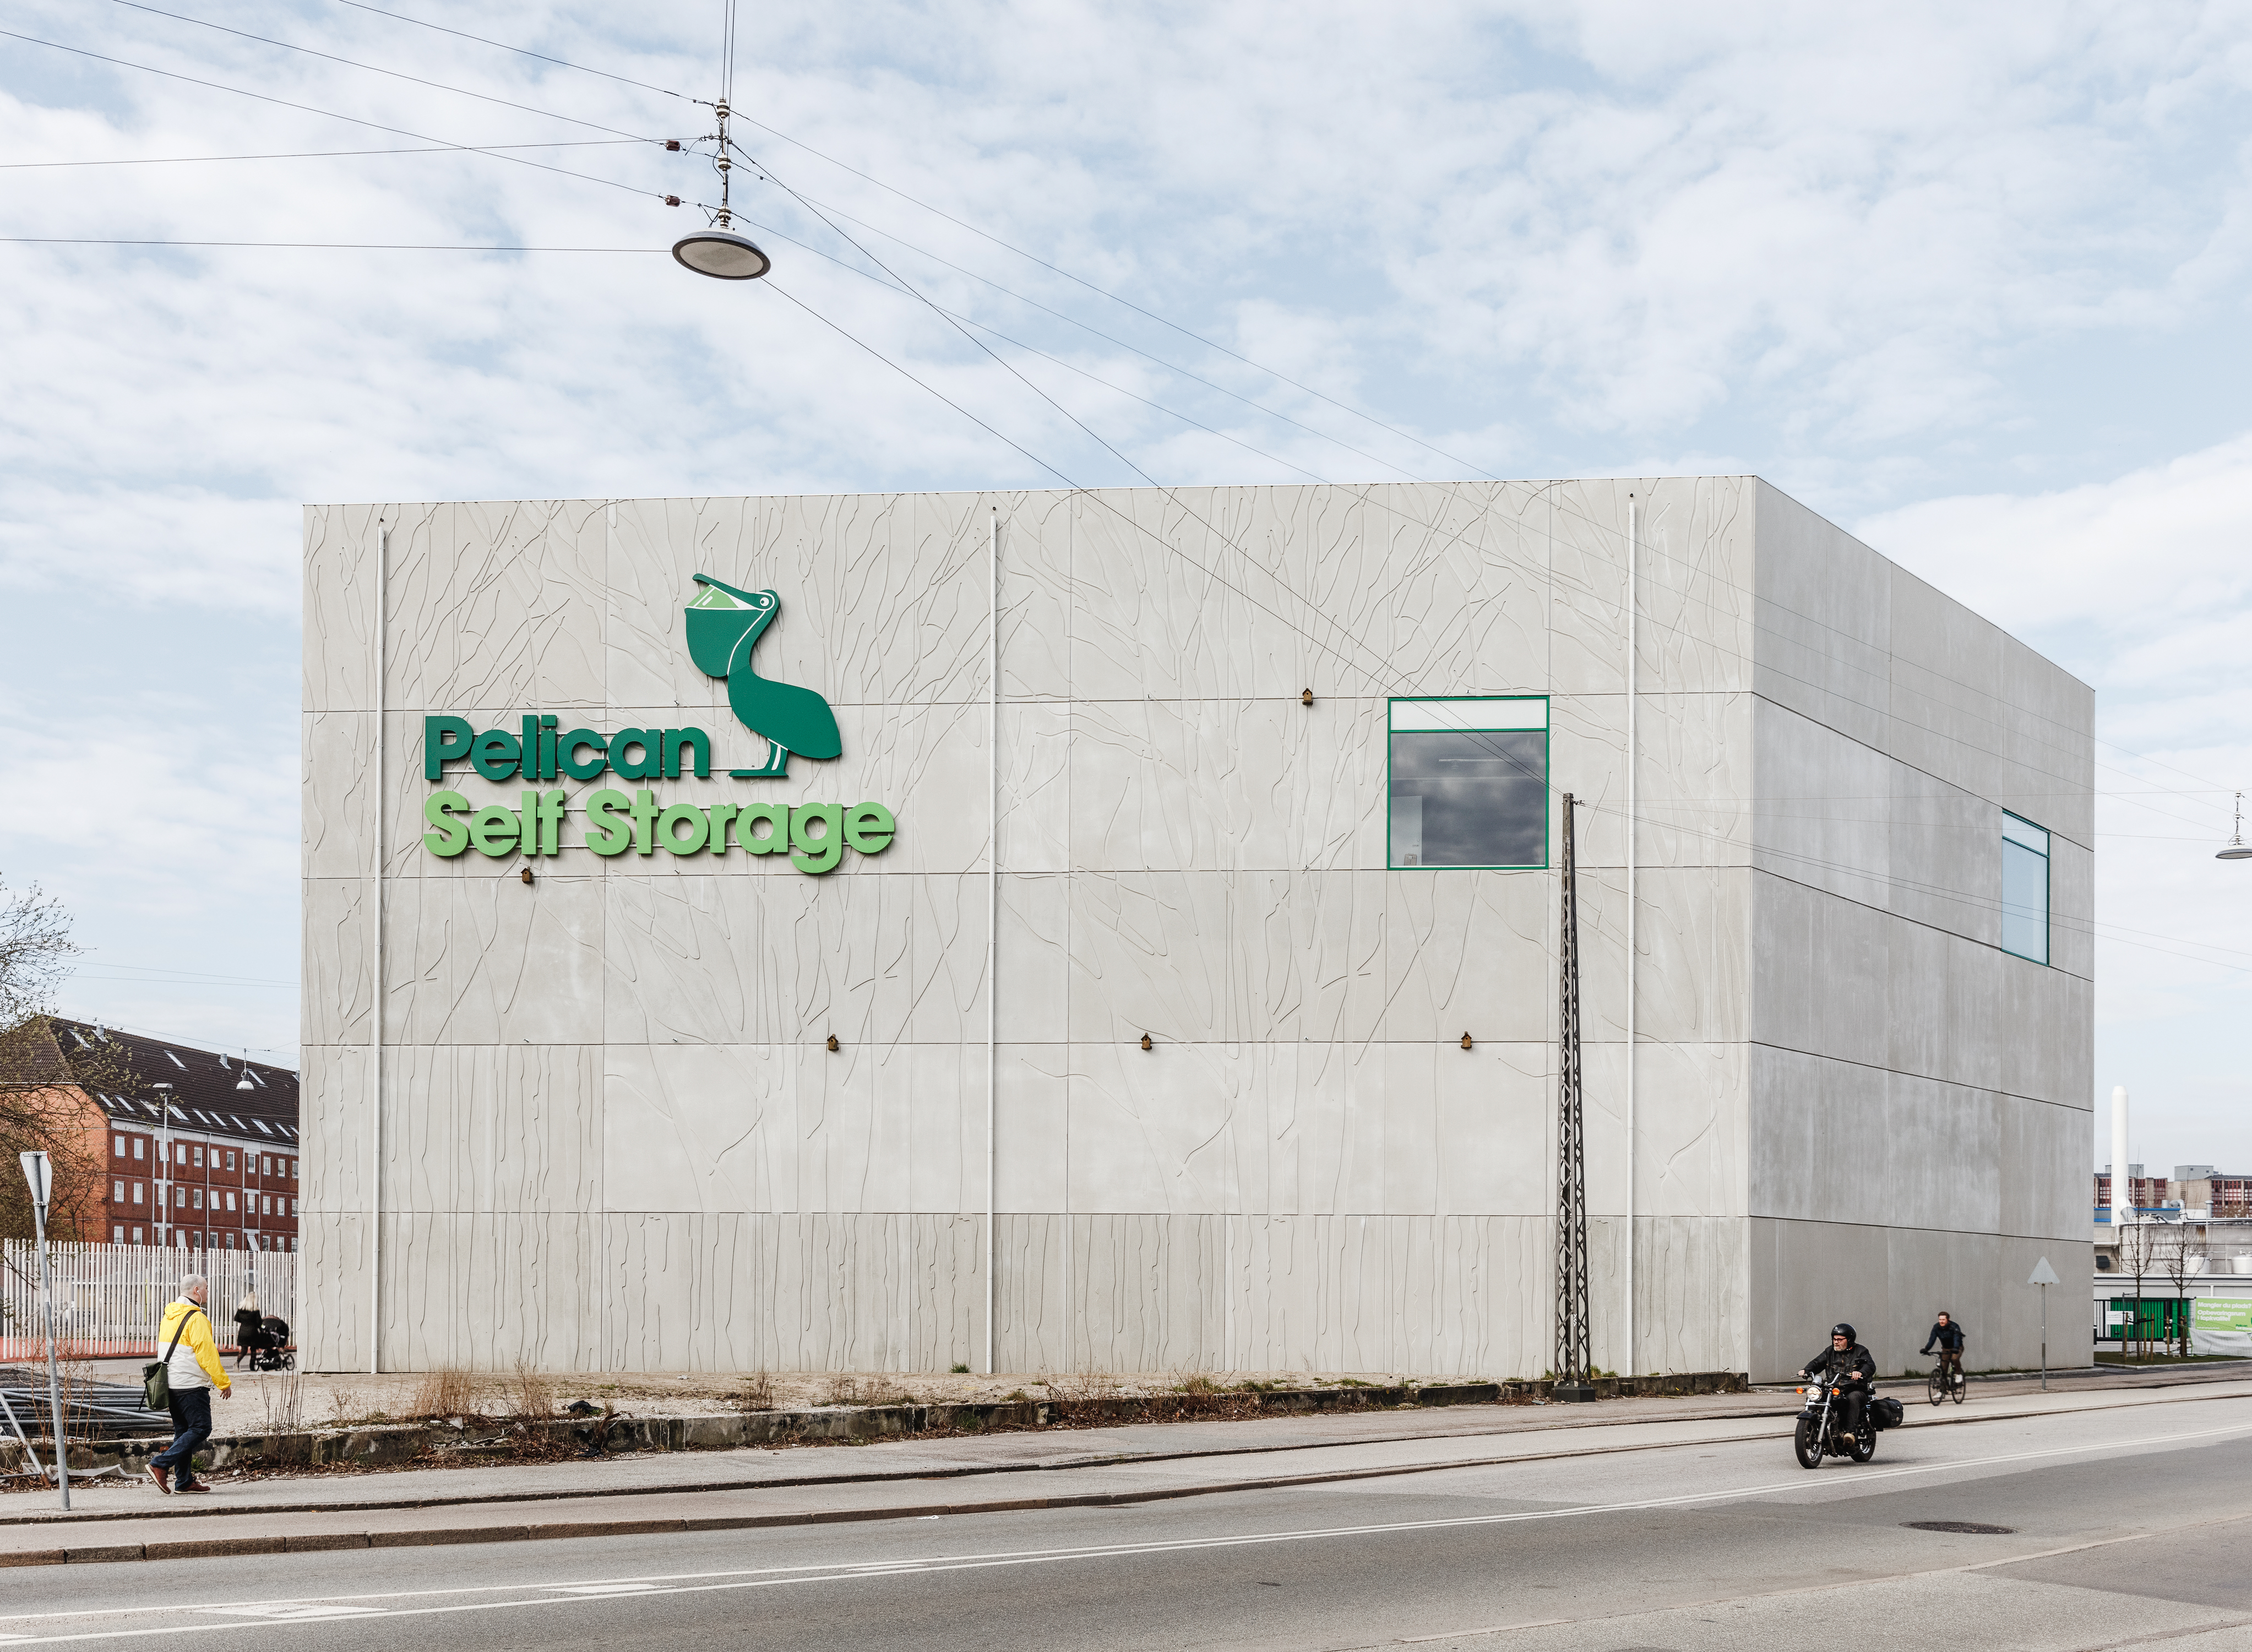 Pelican Self Storage by Lendager Group